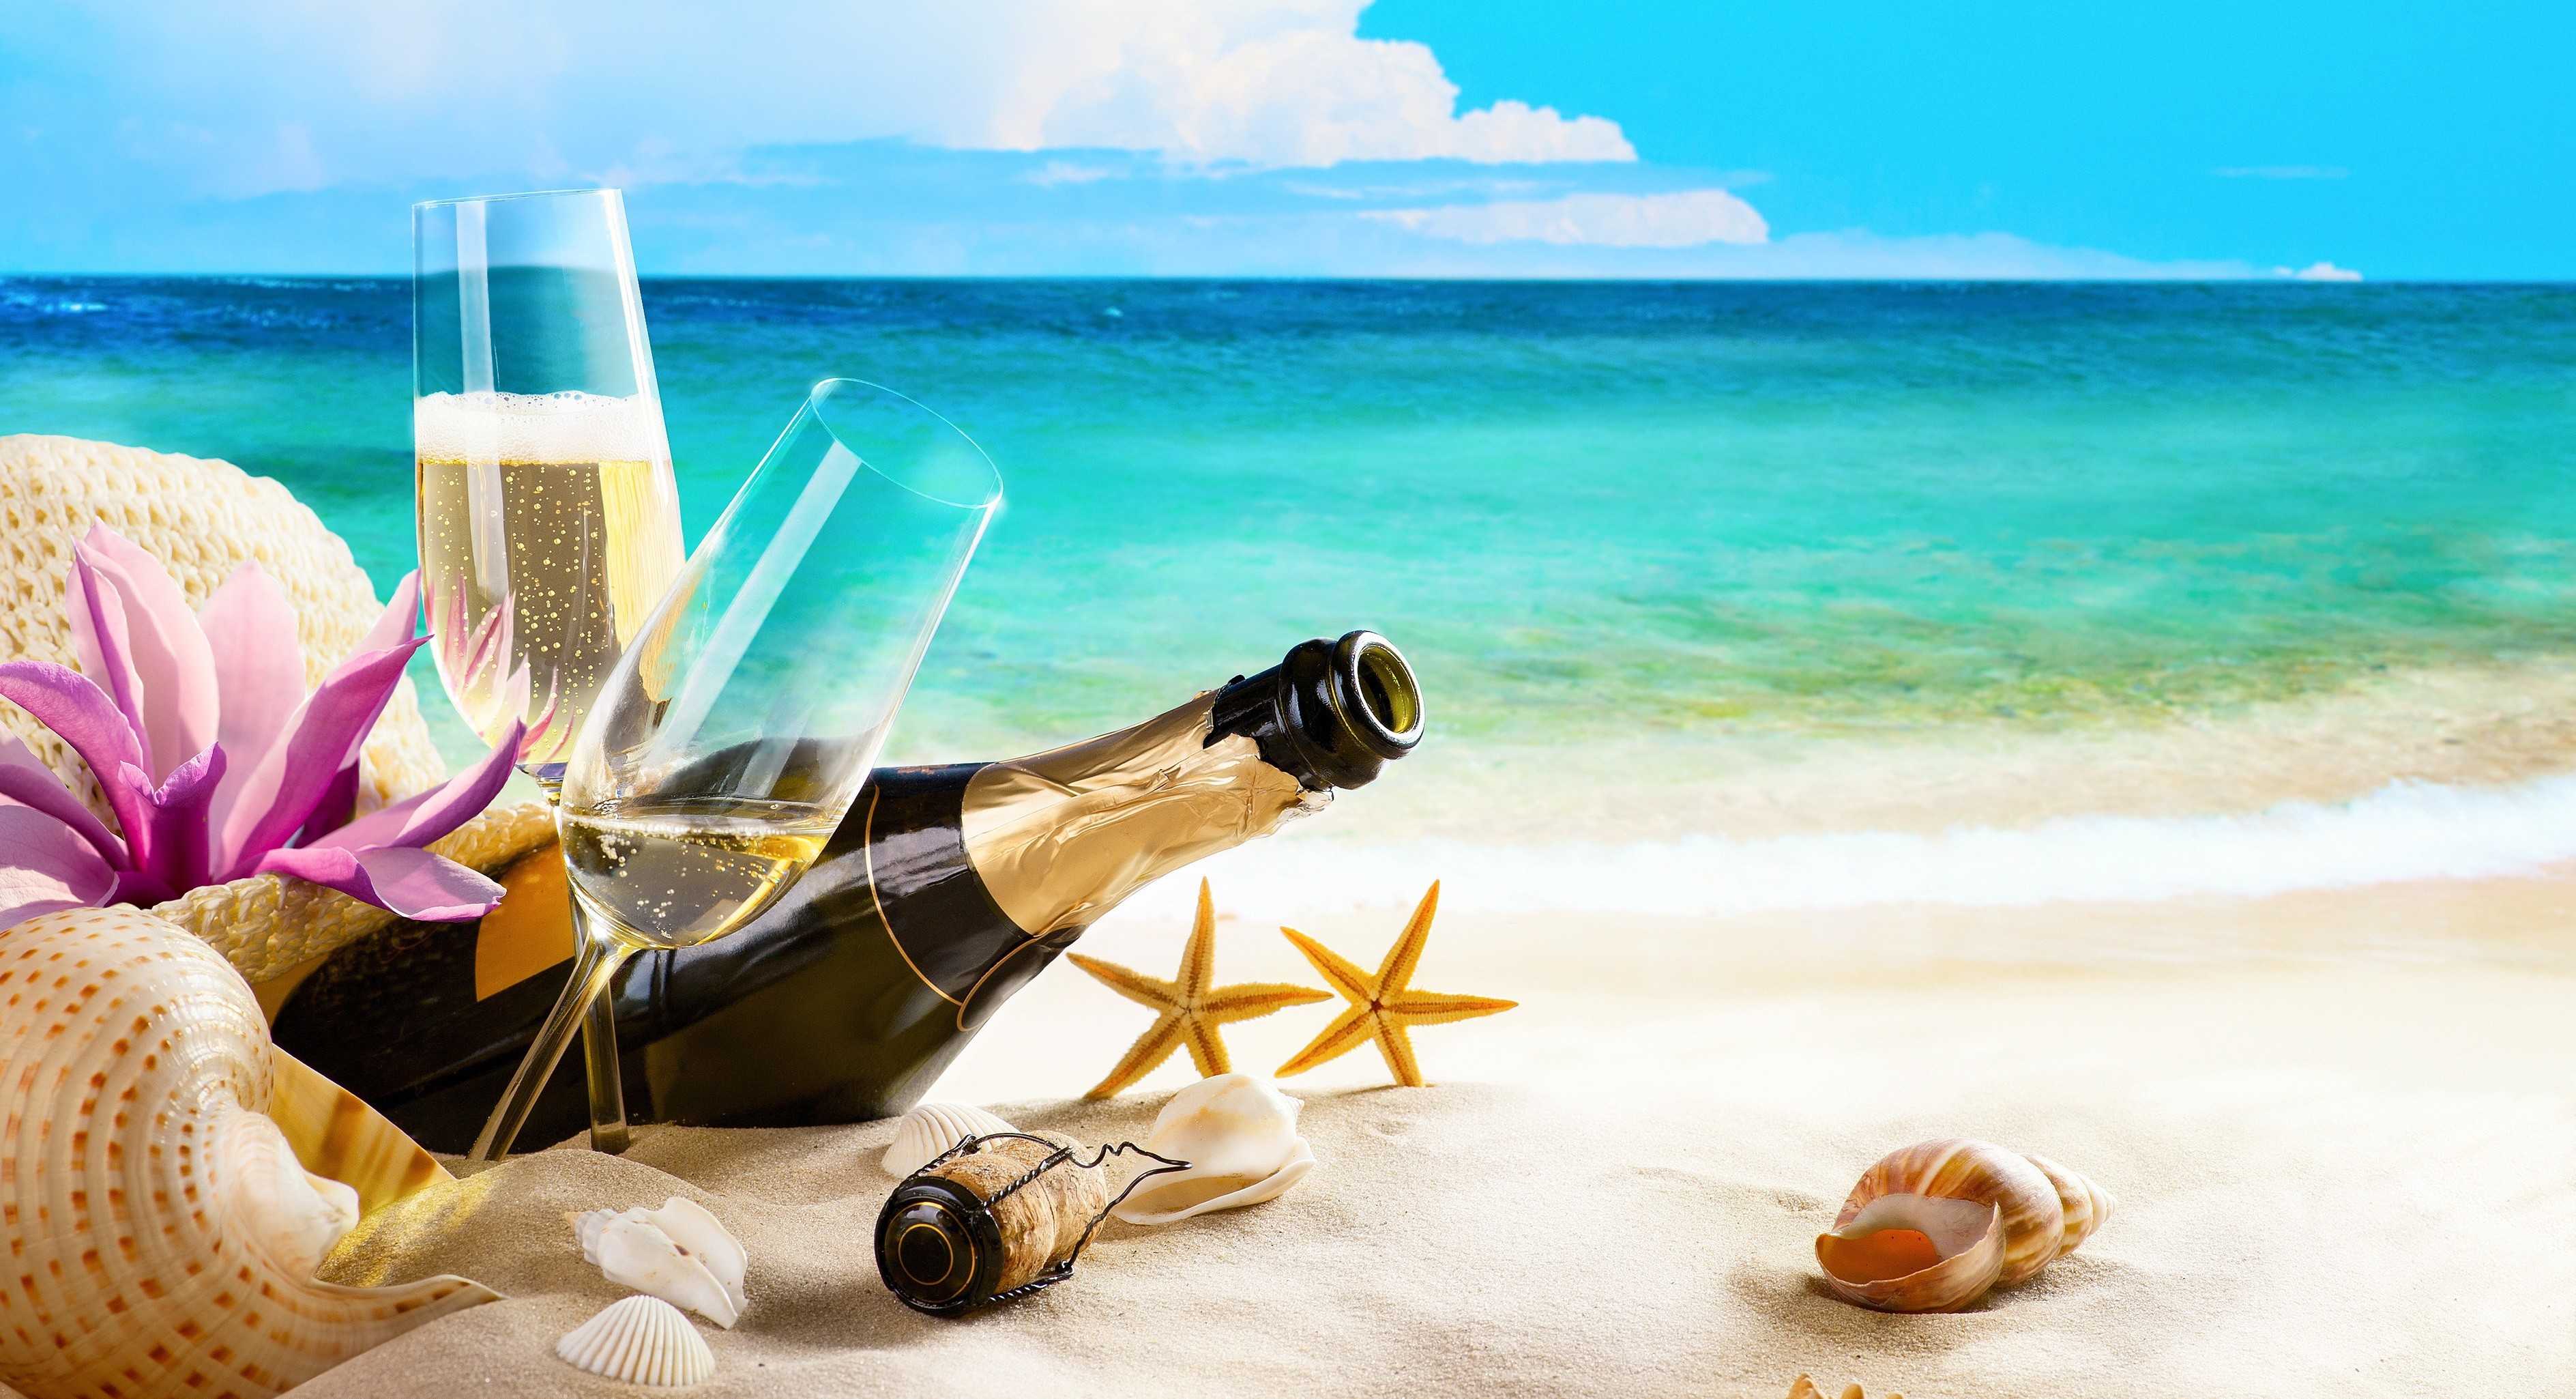 A champagne bottle and two glasses in the sand on the beach